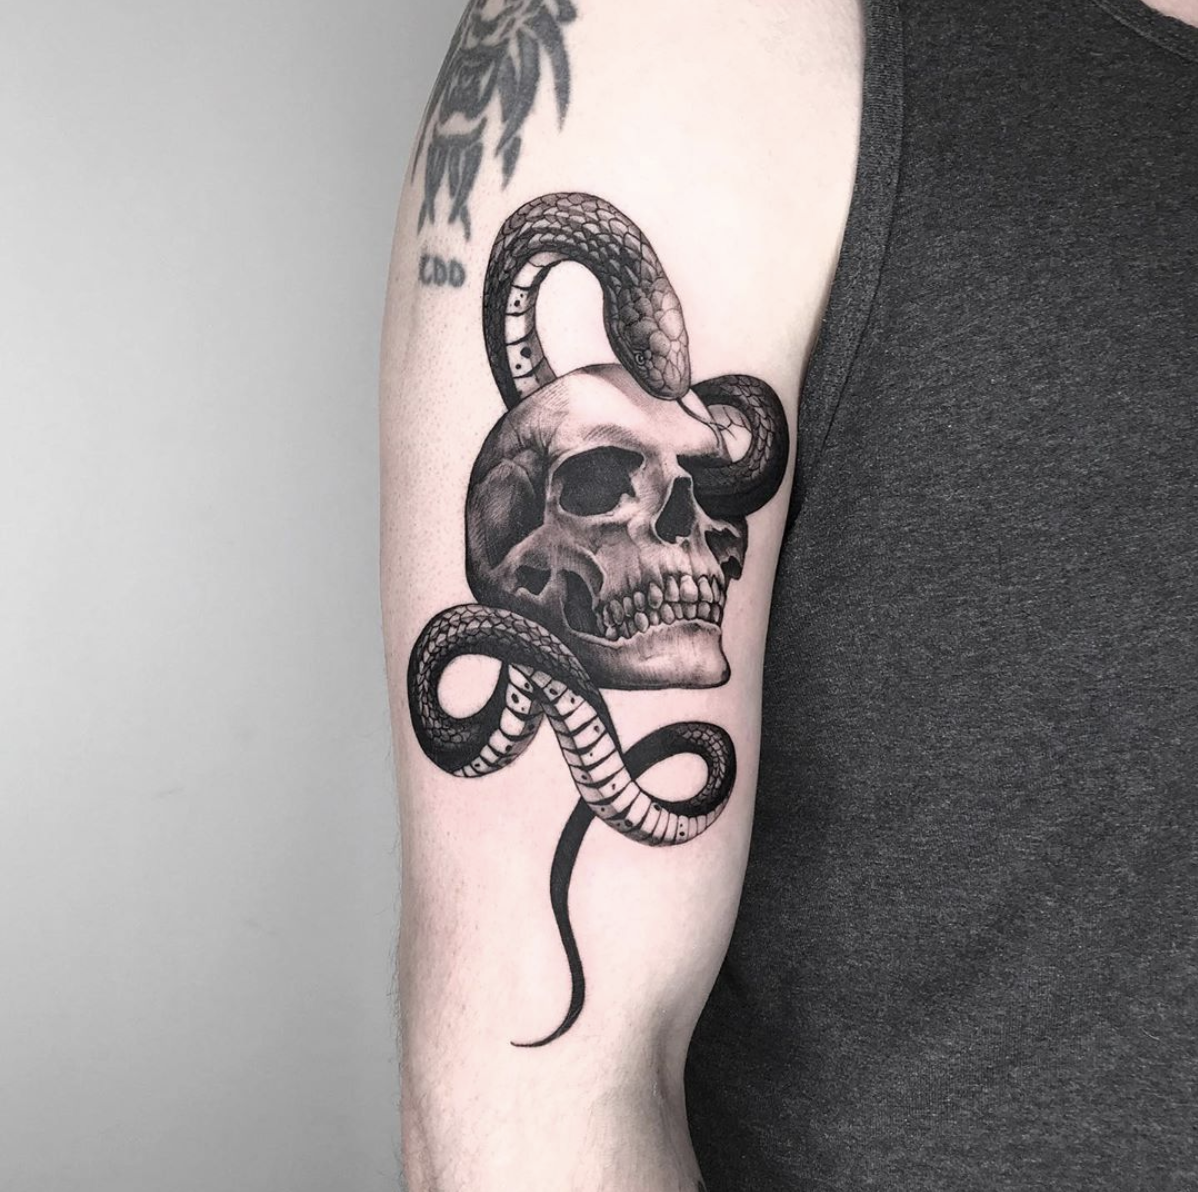 17 'Unique' Tattoo Ideas Tattoo Artists Are Sick To Death Of Doing